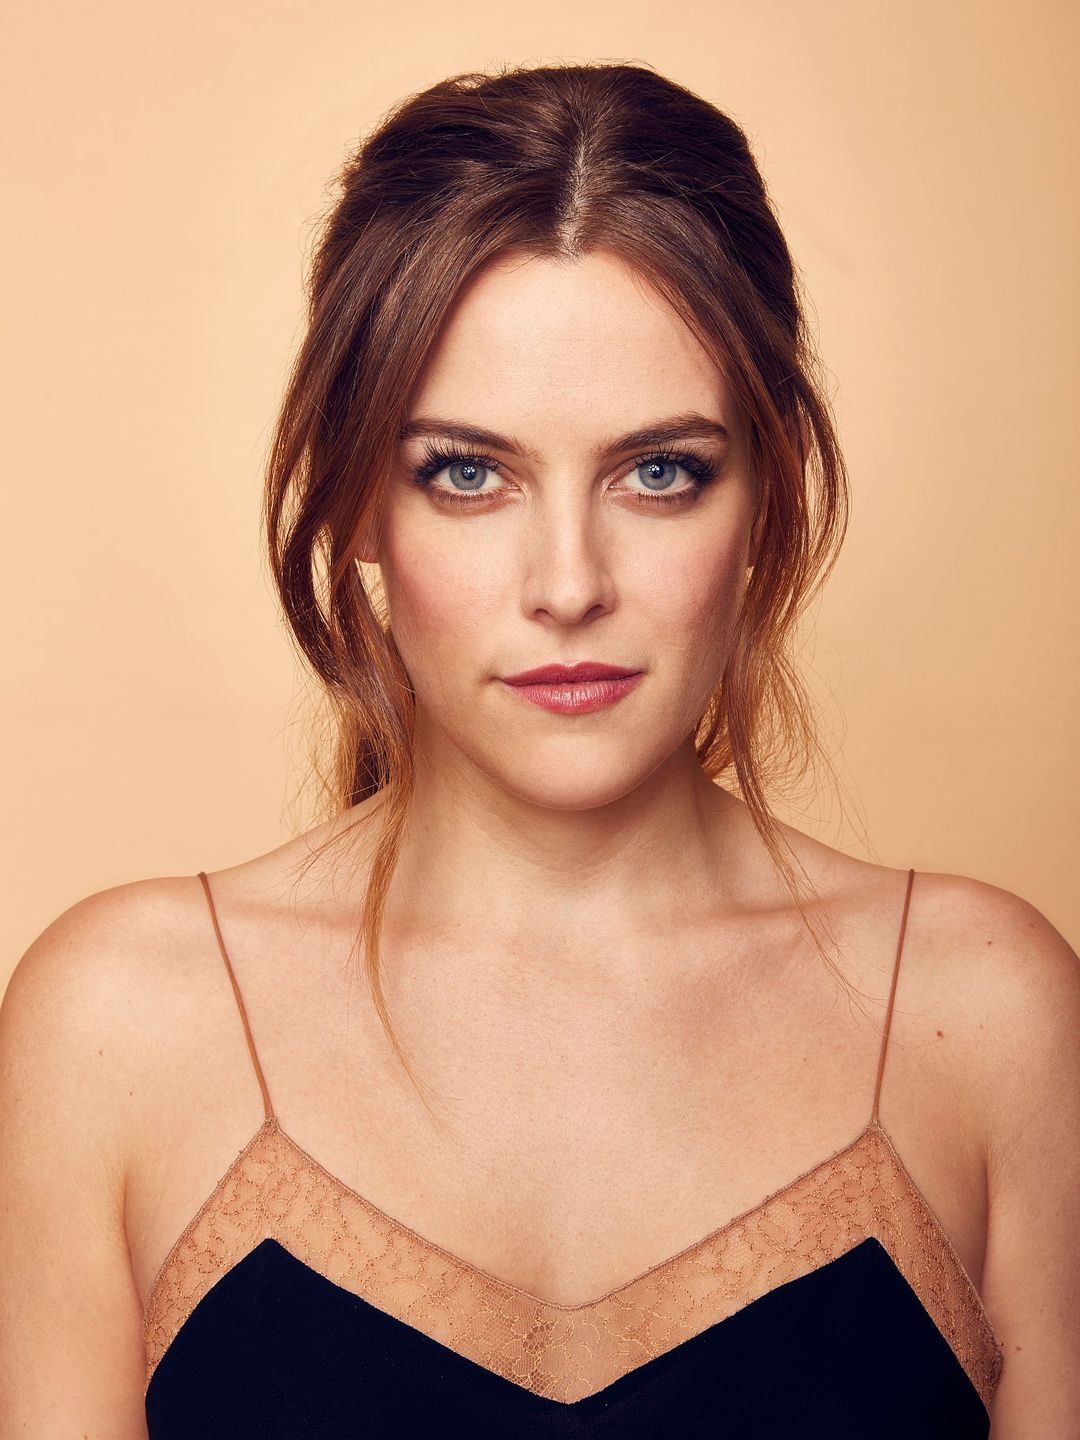 Riley Keough appearance